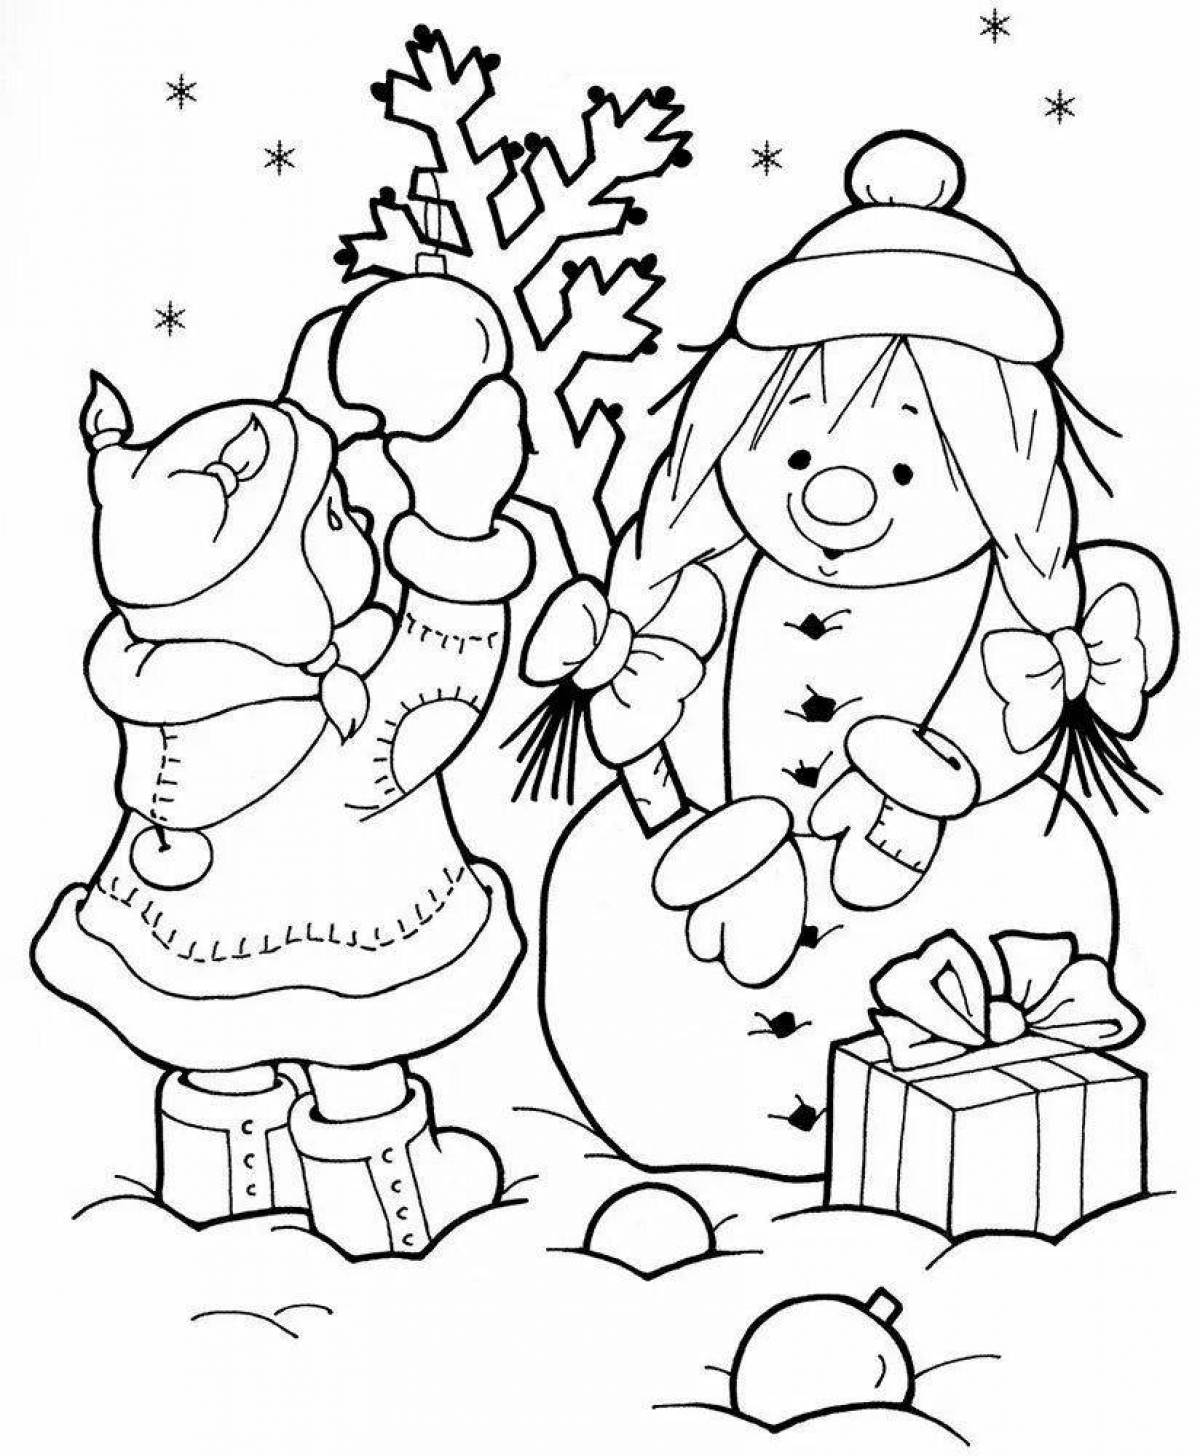 Exquisite coloring book for children 6 years old winter